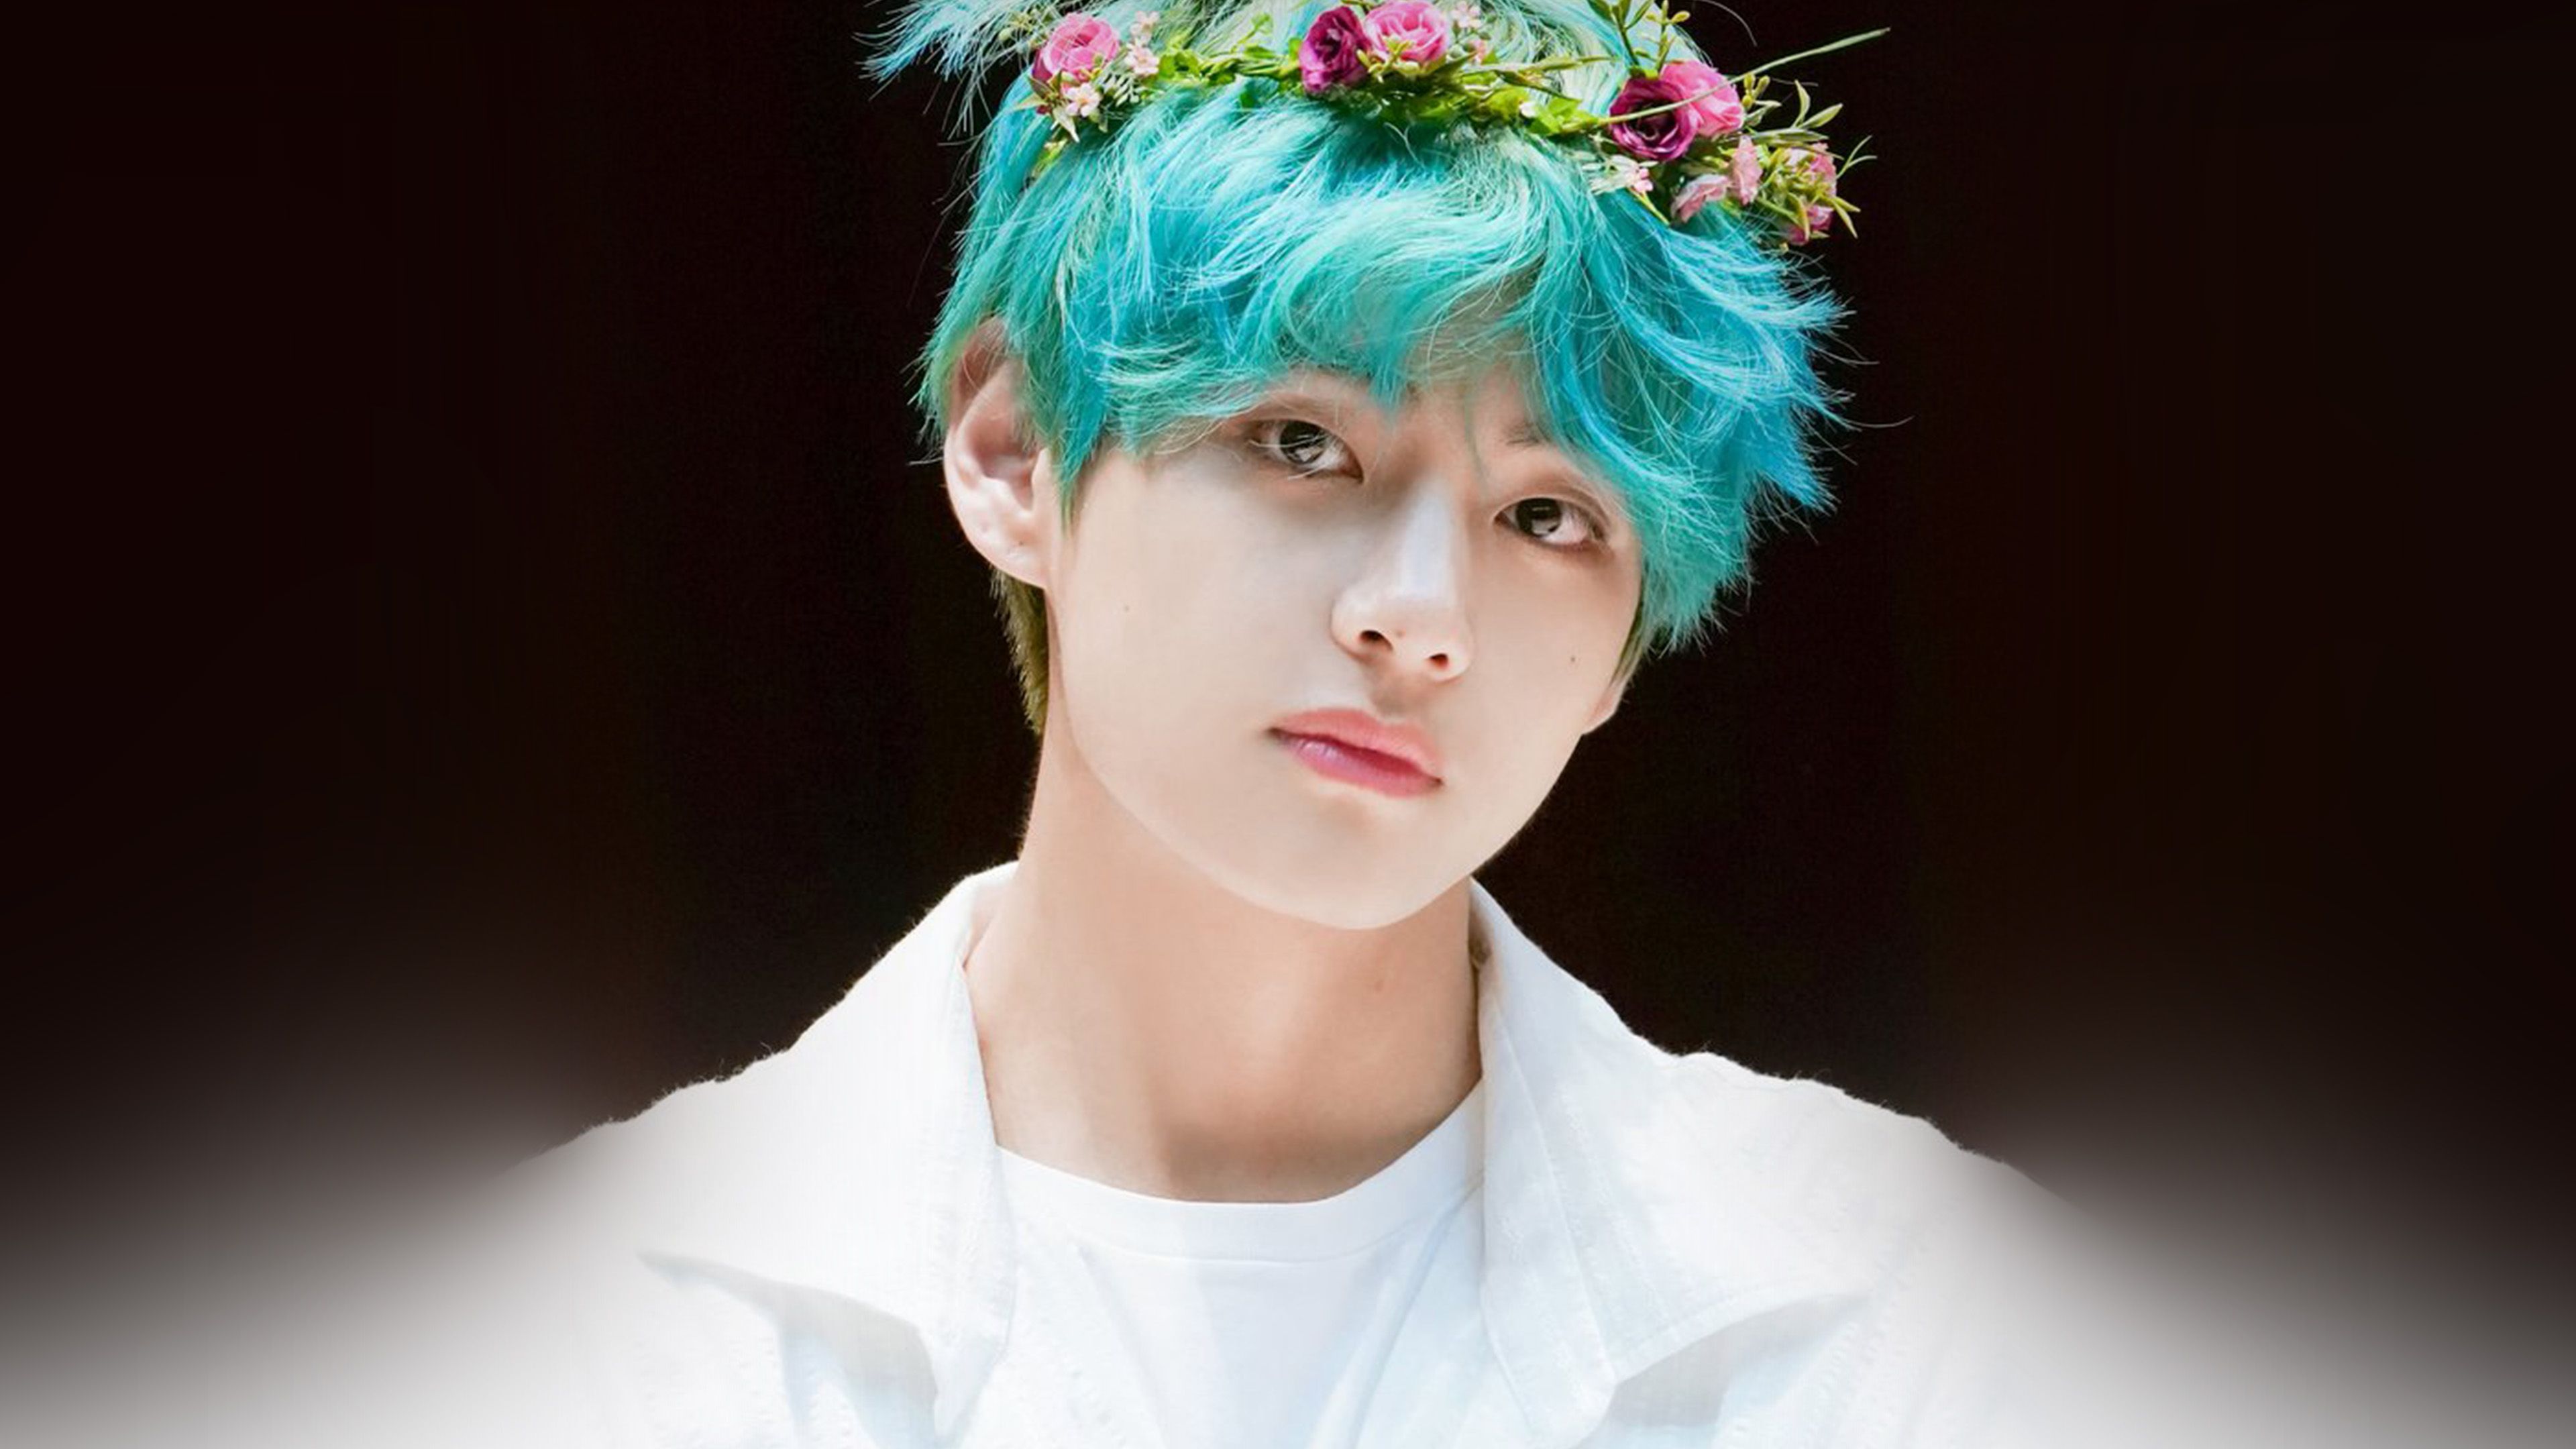 Iphone Taehyung Wallpapers Hd.